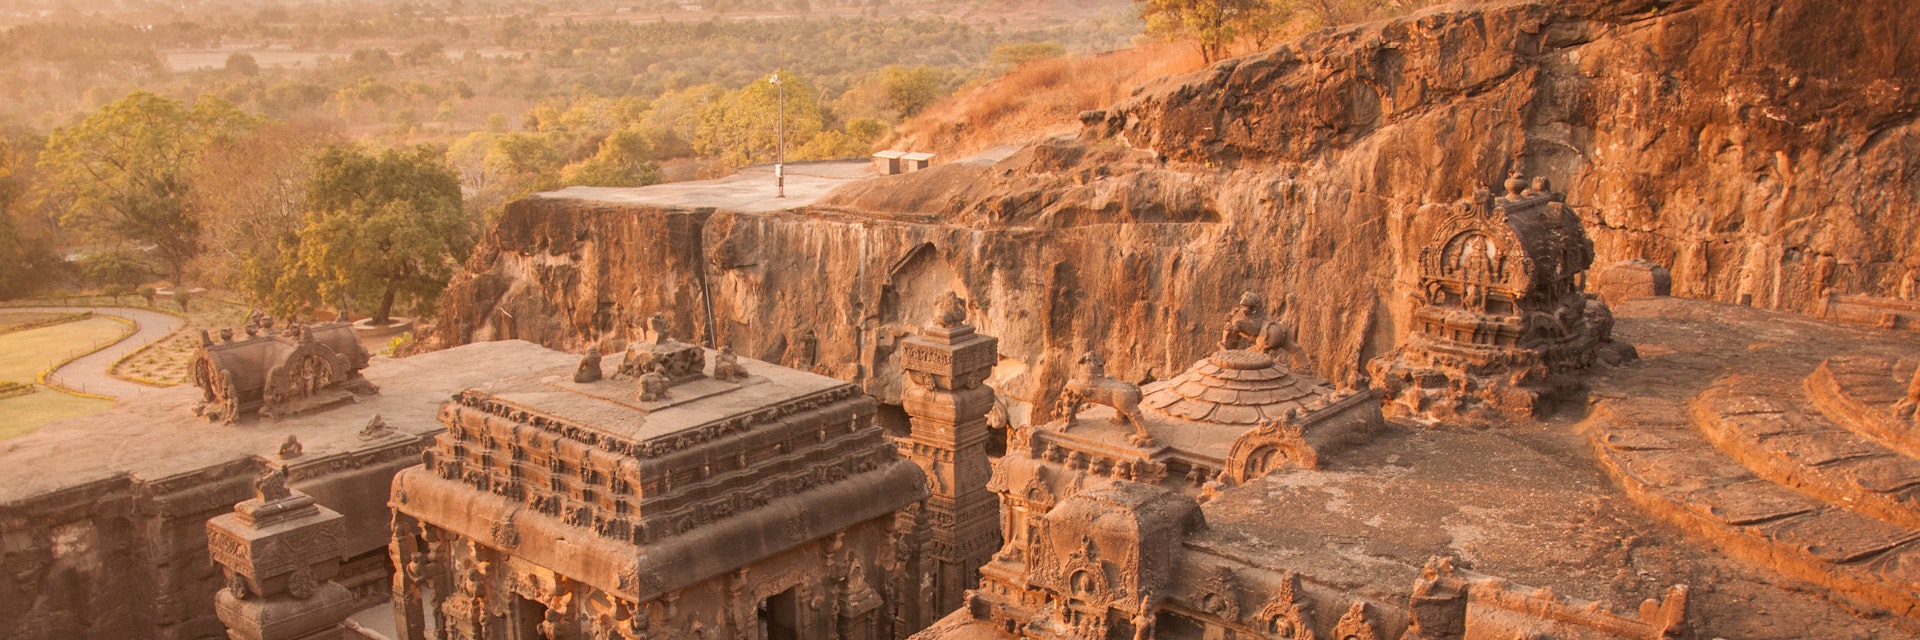 Top view of the Kailasanath Temple in Ellora Caves at sunset.